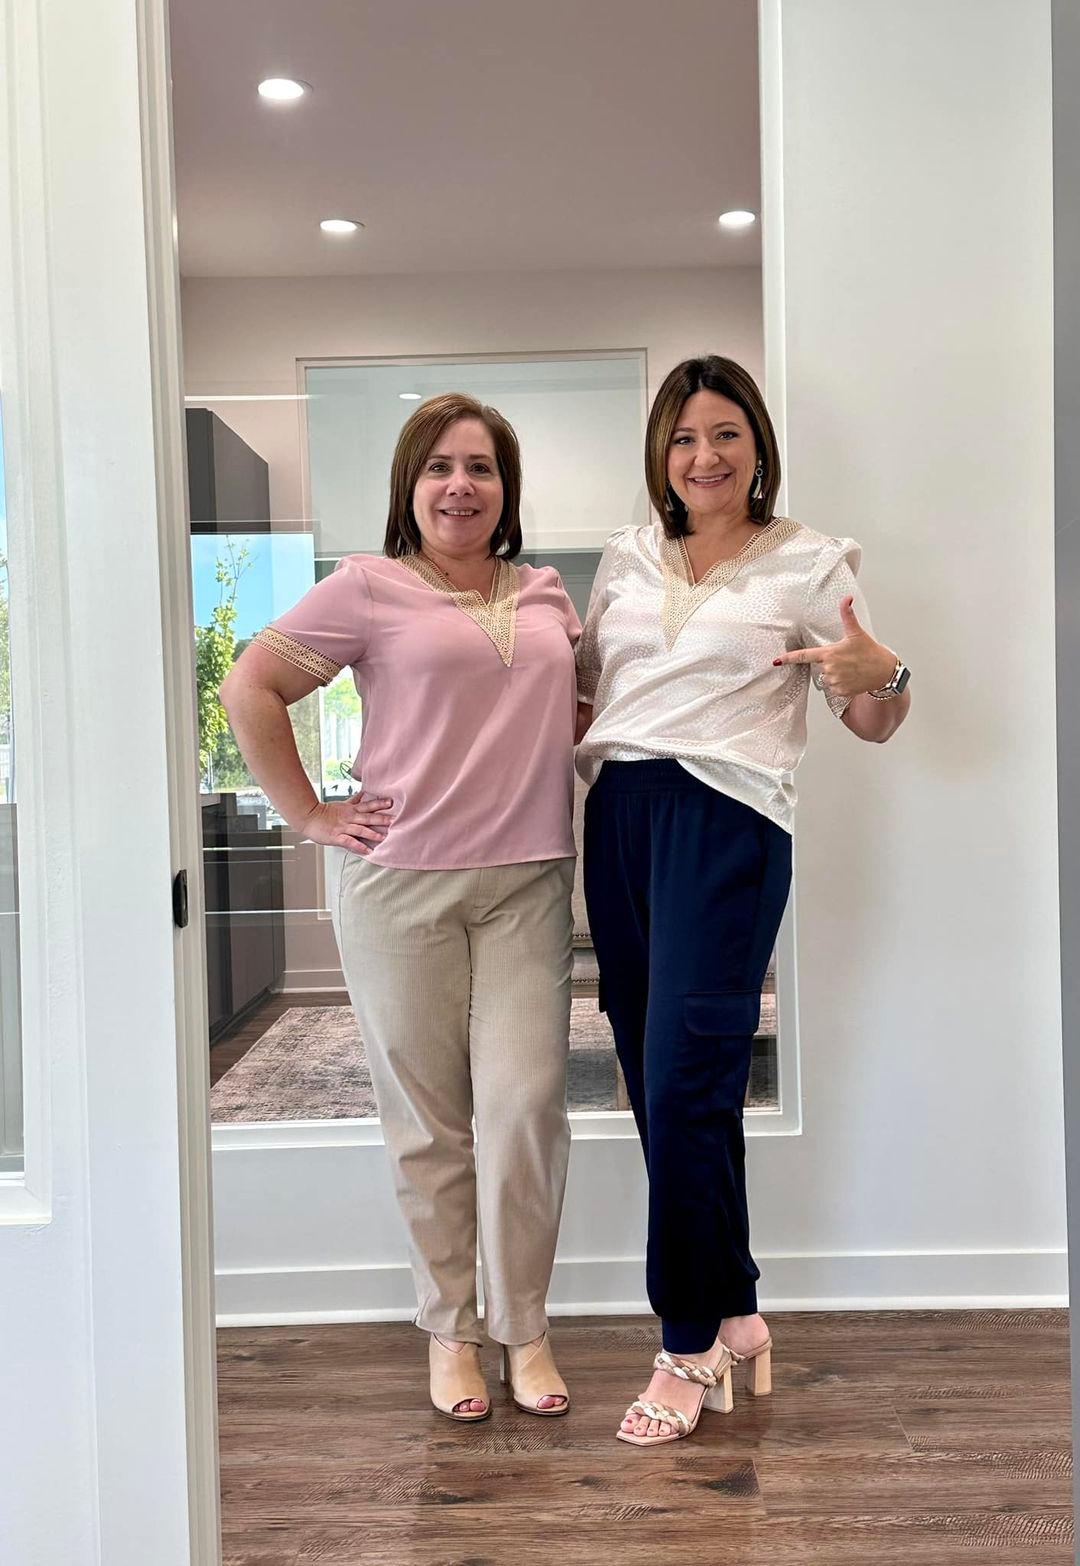 We did it again! Dressing alike because we’re like family over here!! Jennifer Mabou - State Farm Insurance Agent Sulphur (337)527-0027